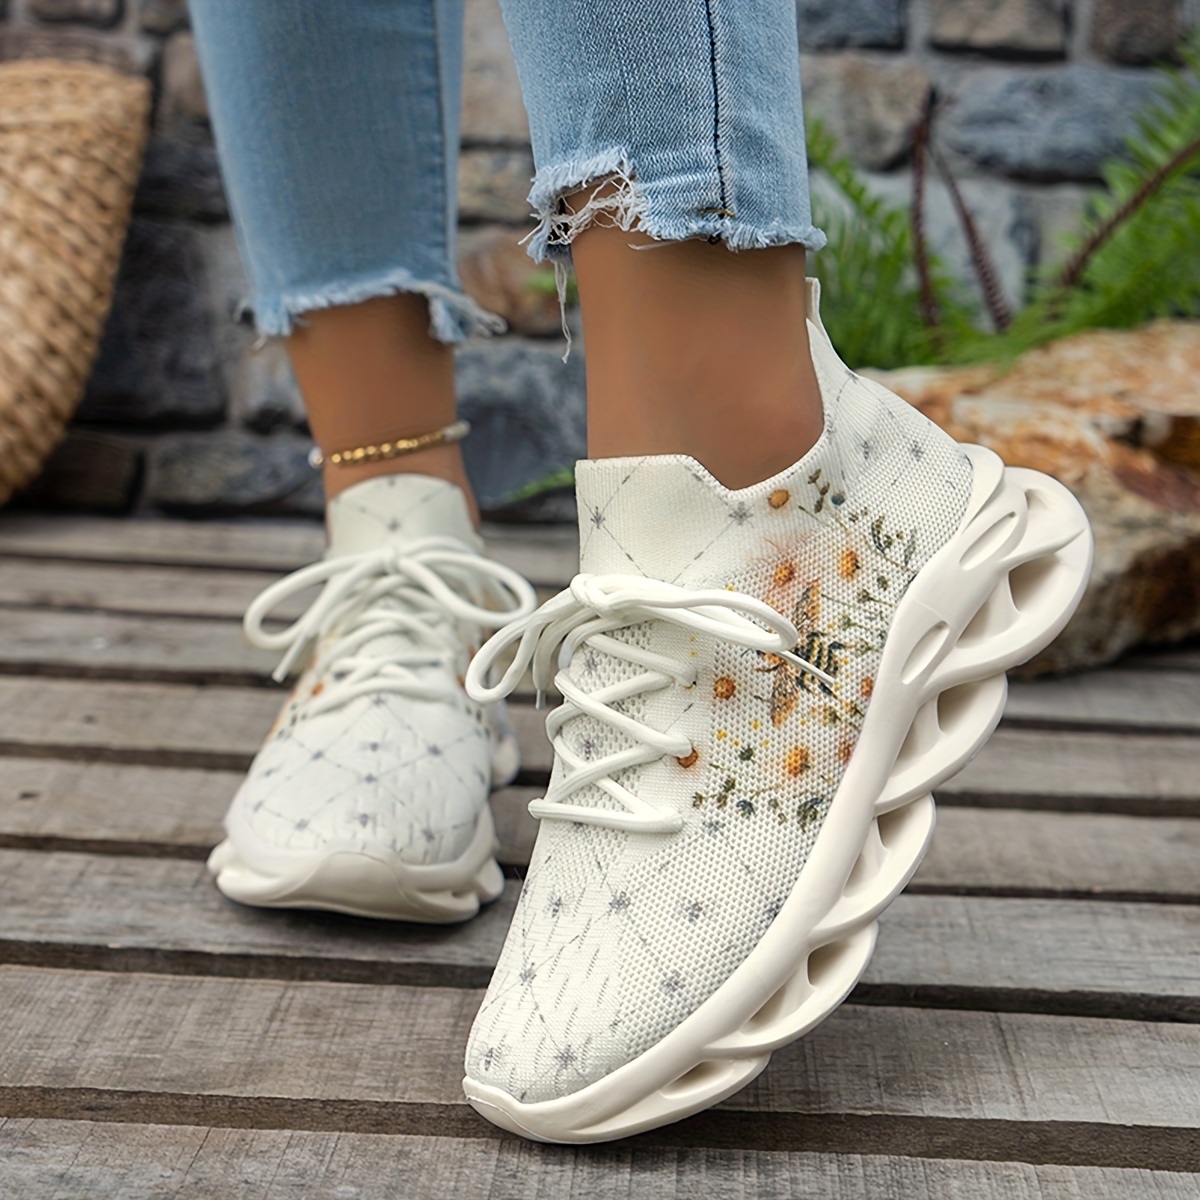 

Women's Knit Bee Print Fashion Sneakers, Breathable Athletic Casual Running Shoes, Lightweight And Comfortable Shoes